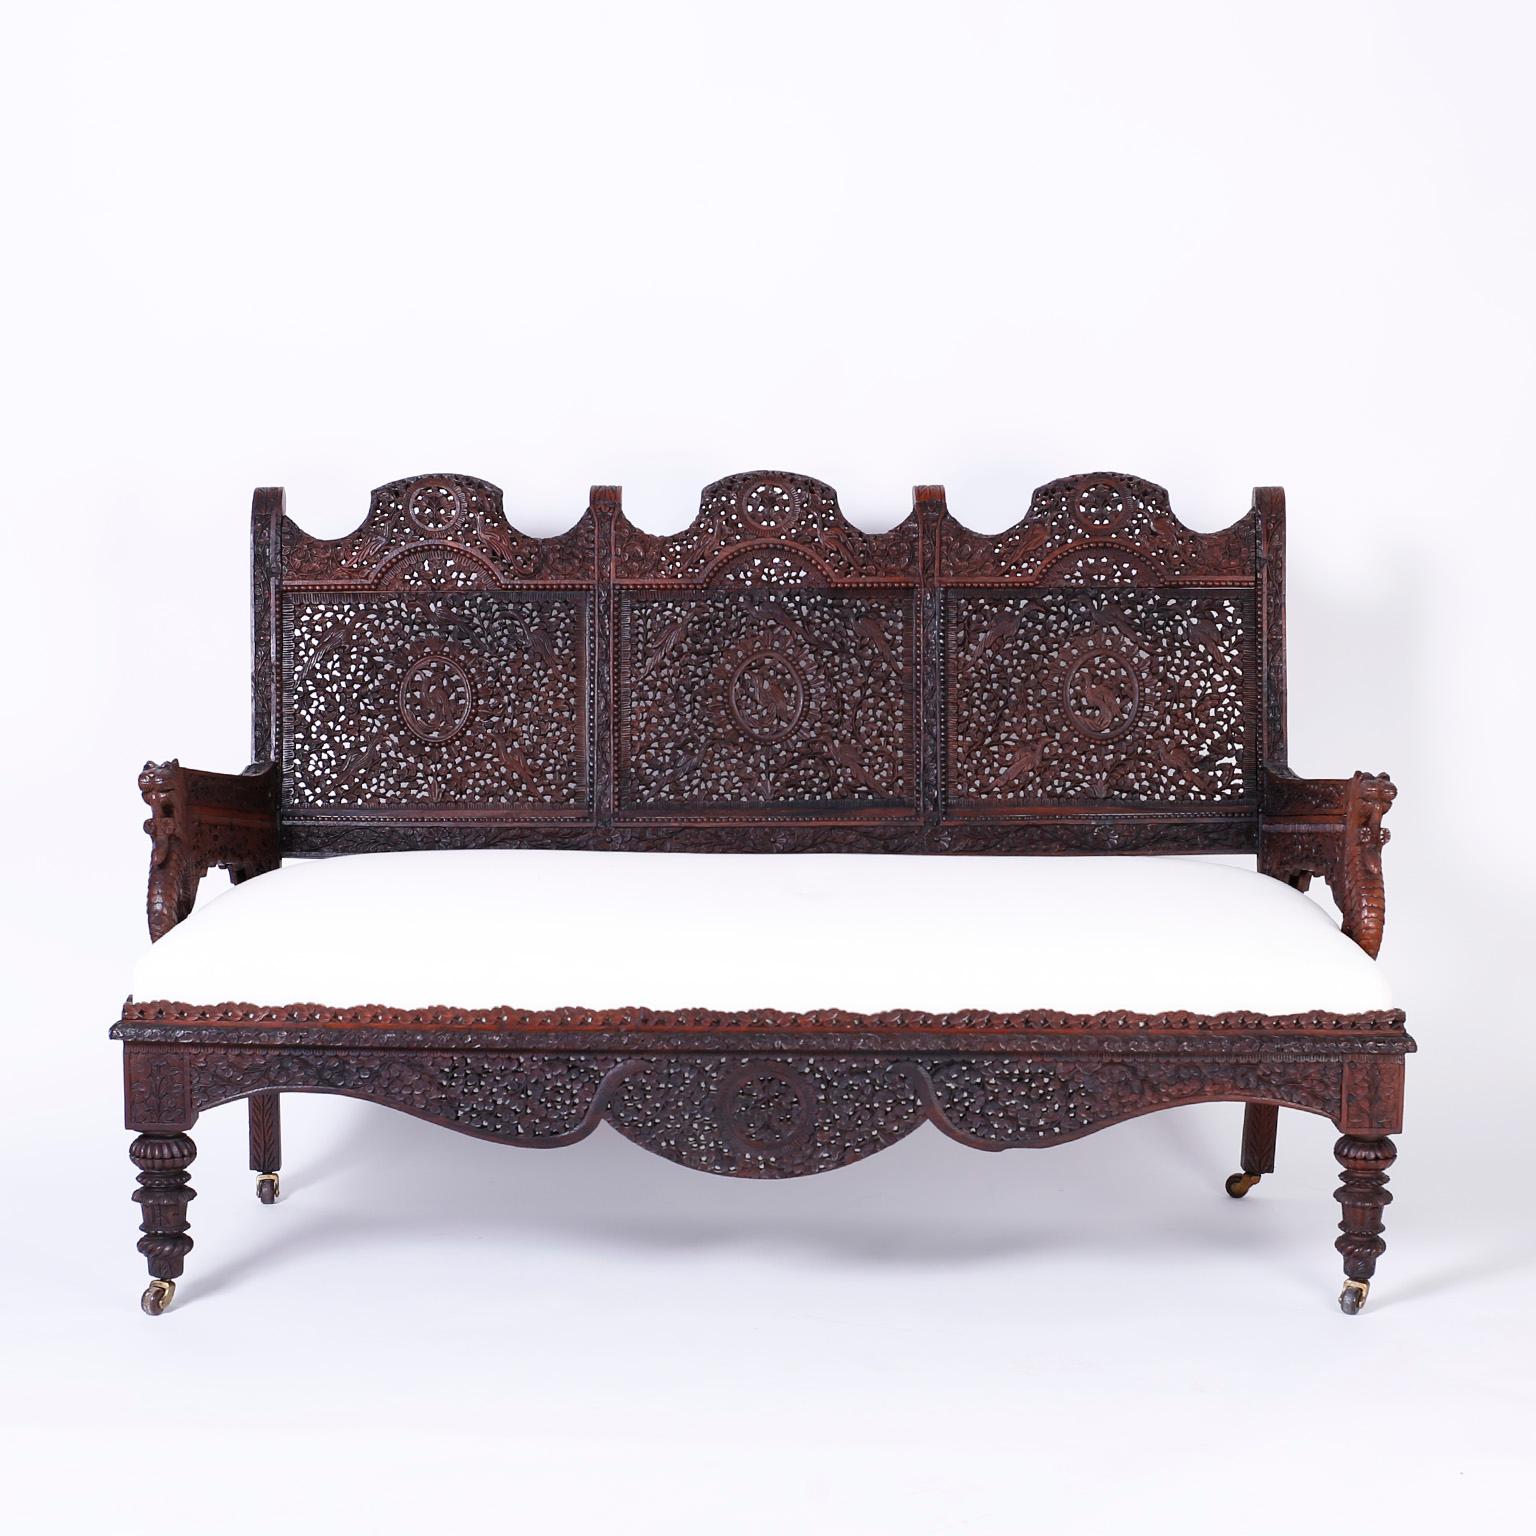 Antique Anglo-Indian hand carved mahogany sofa or settee with elaborate carvings throughout, featuring three back panels with bird medallions in a floral field, serpent arms, floral carved skirt and turned and carved front legs. Best of the Genre.